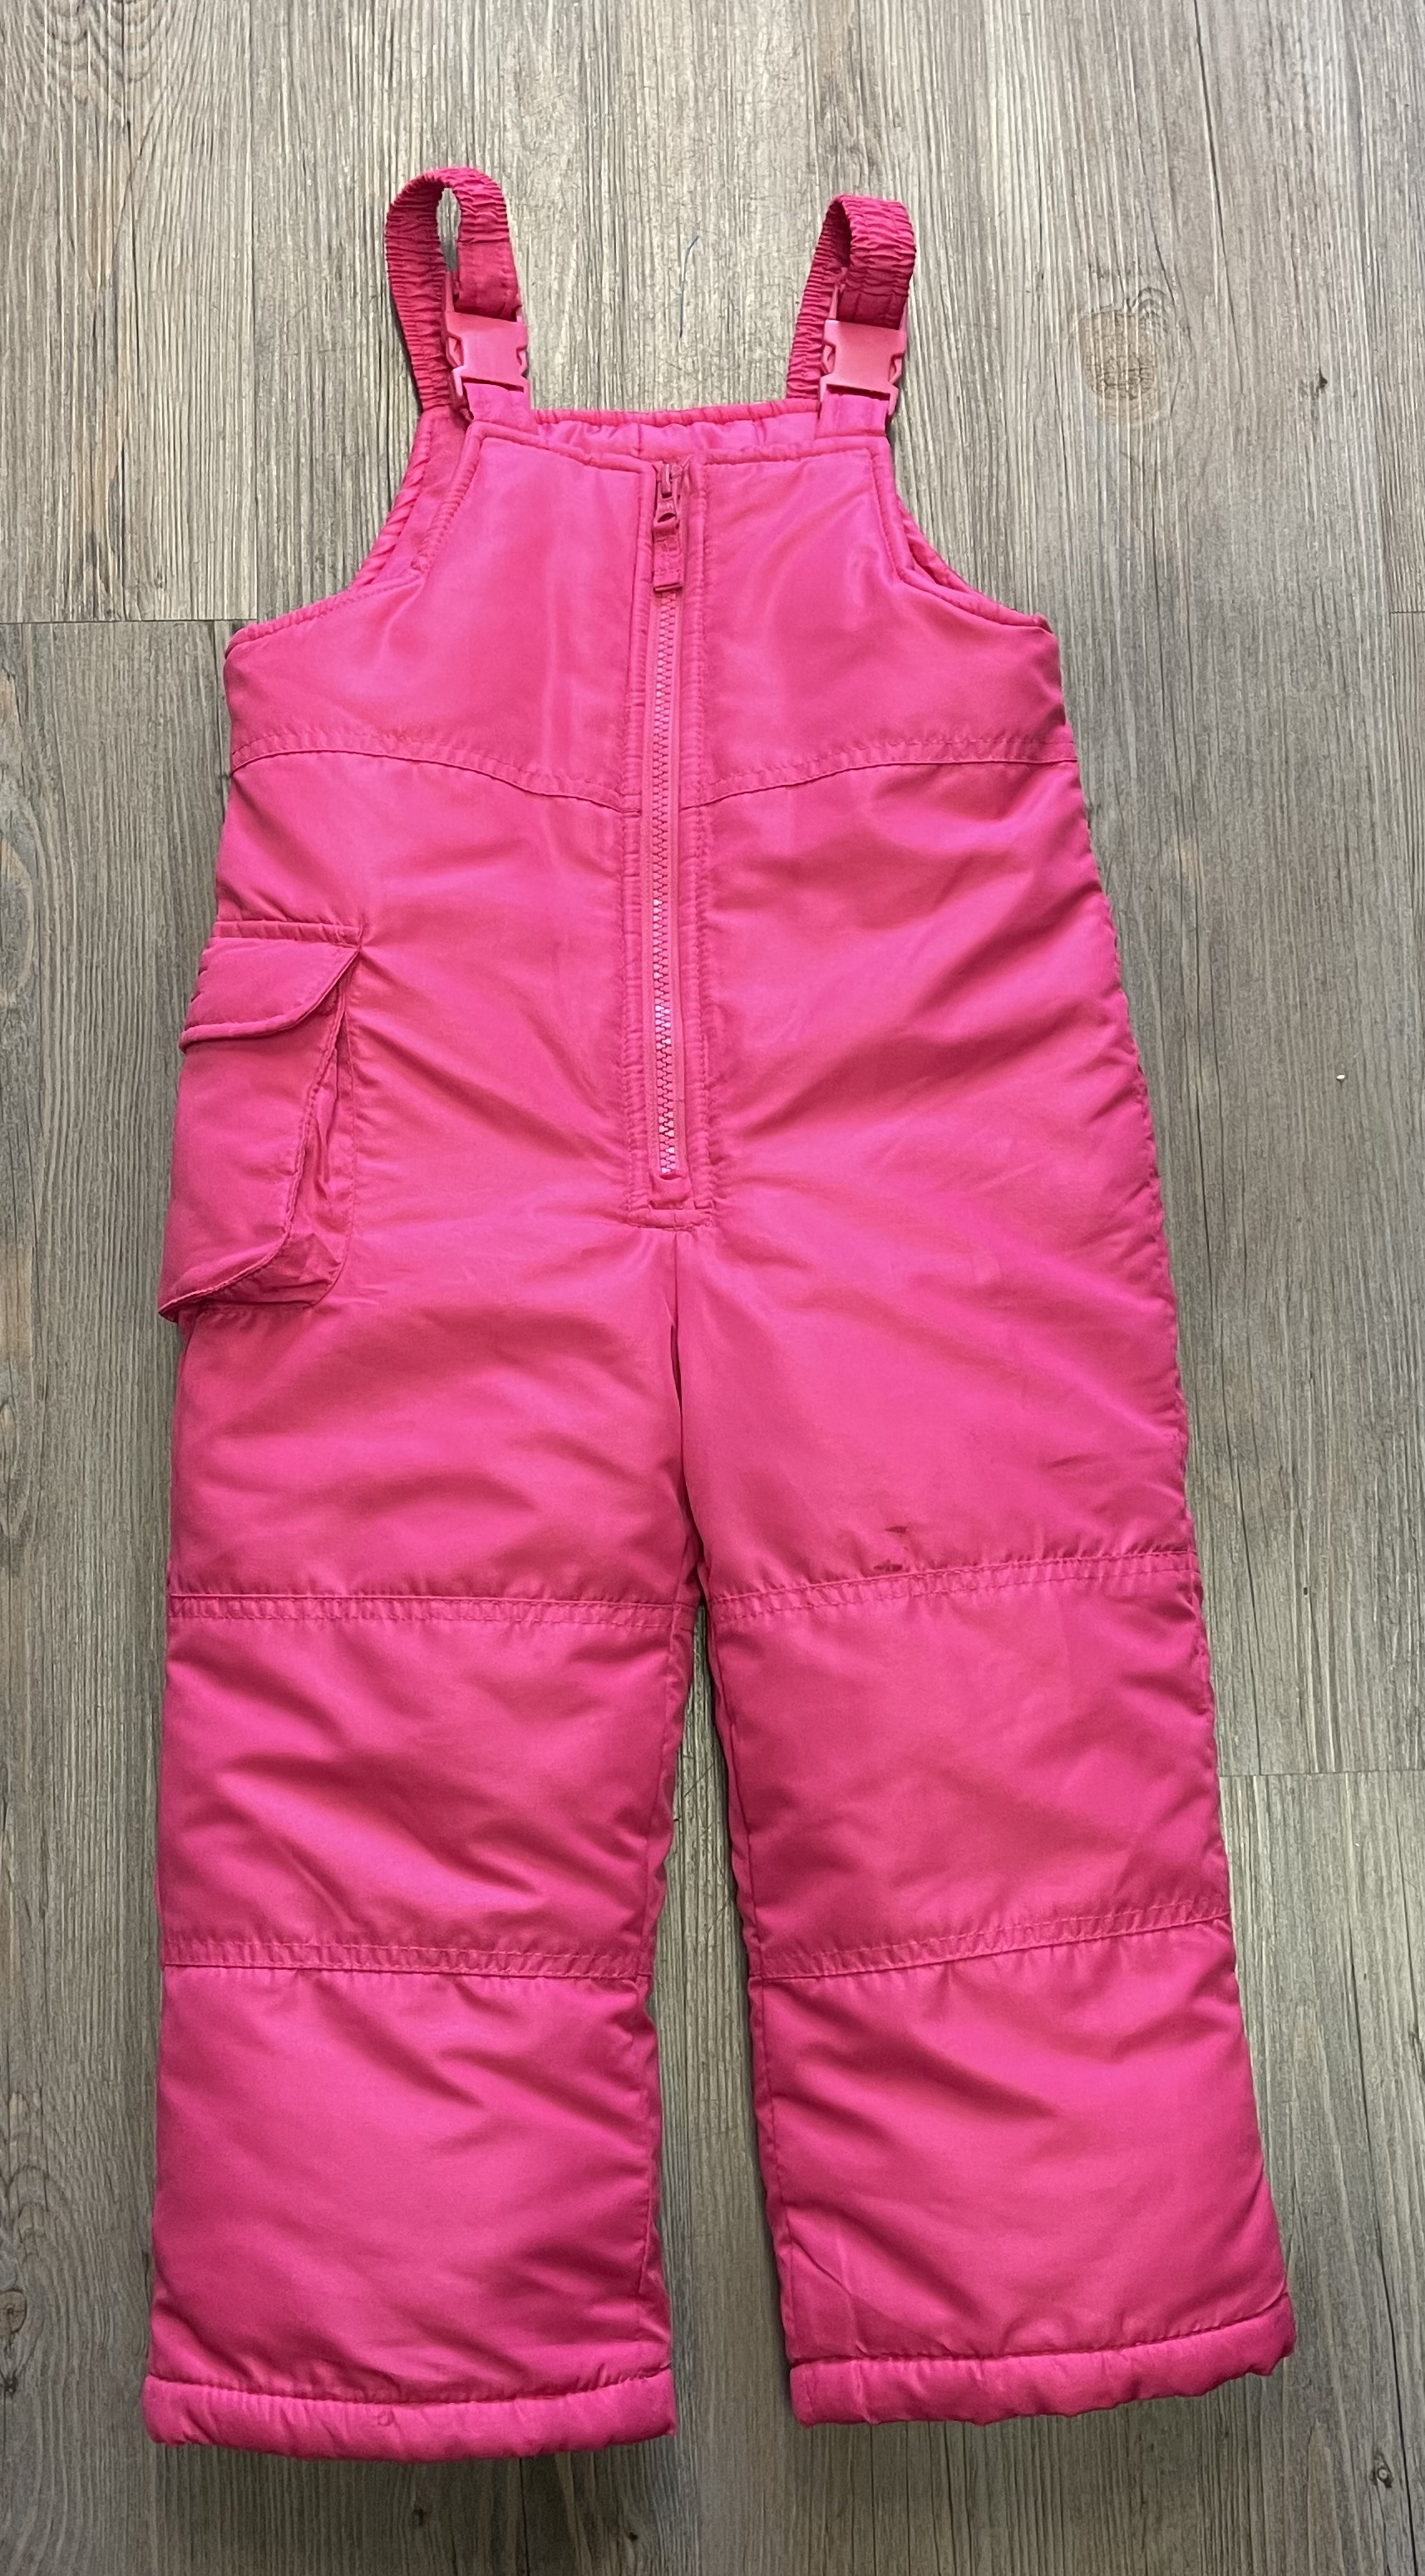 London Fog Snow Pants, Pink, Size: 4Y
Note - small stains on legs.